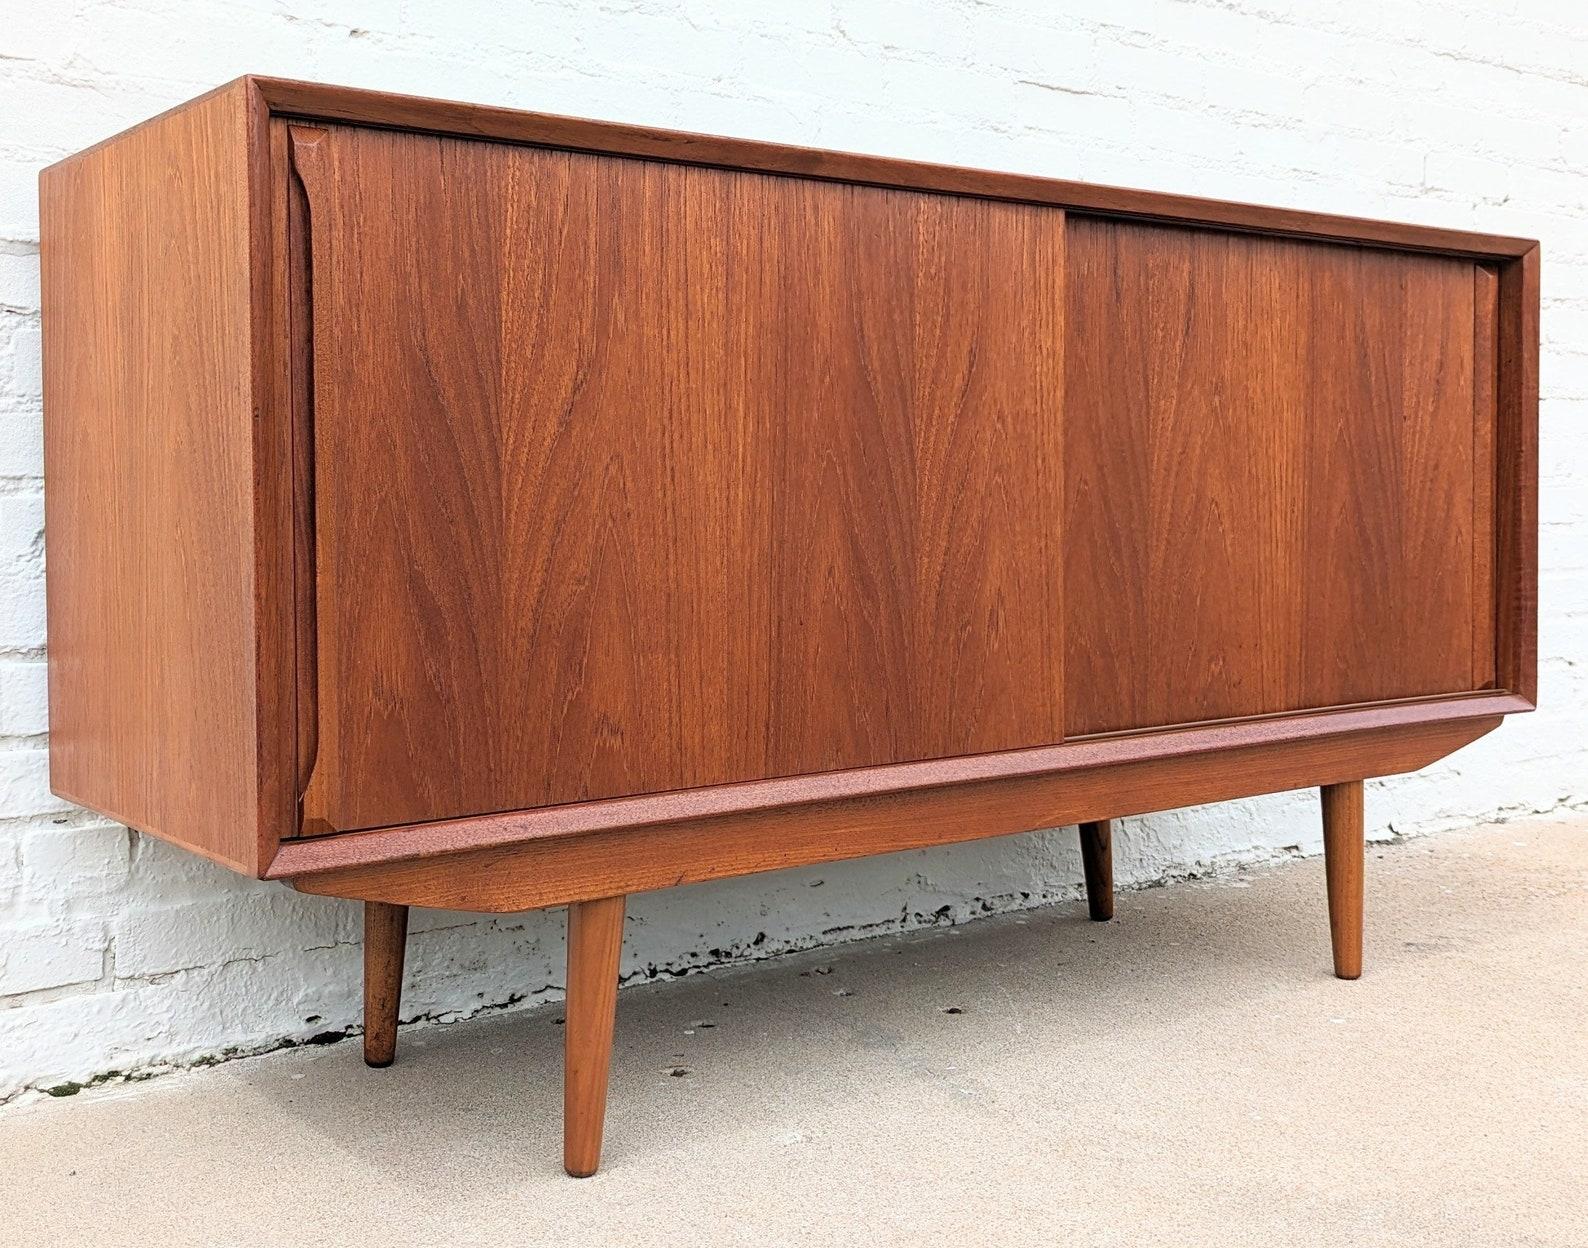 Mid Century Danish Modern Teak Sideboard

Above average vintage condition and structurally sound. Has some expected slight finish wear and scratching. Has a couple small dings and discolorations on top and edges. Top has been refinished and does not